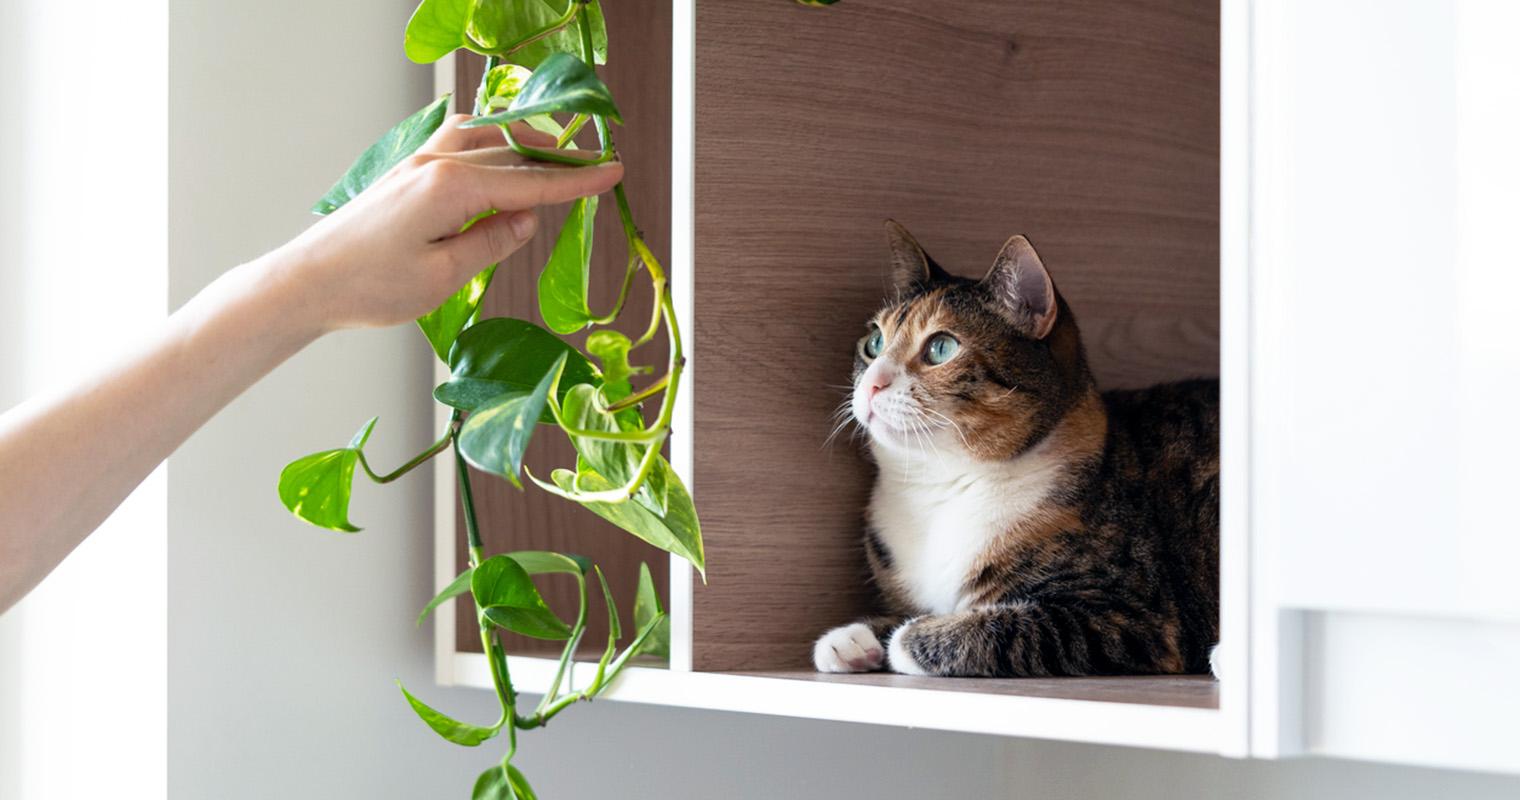 How To Prepare Your Home For Cat: Prepping For Cat Adoption